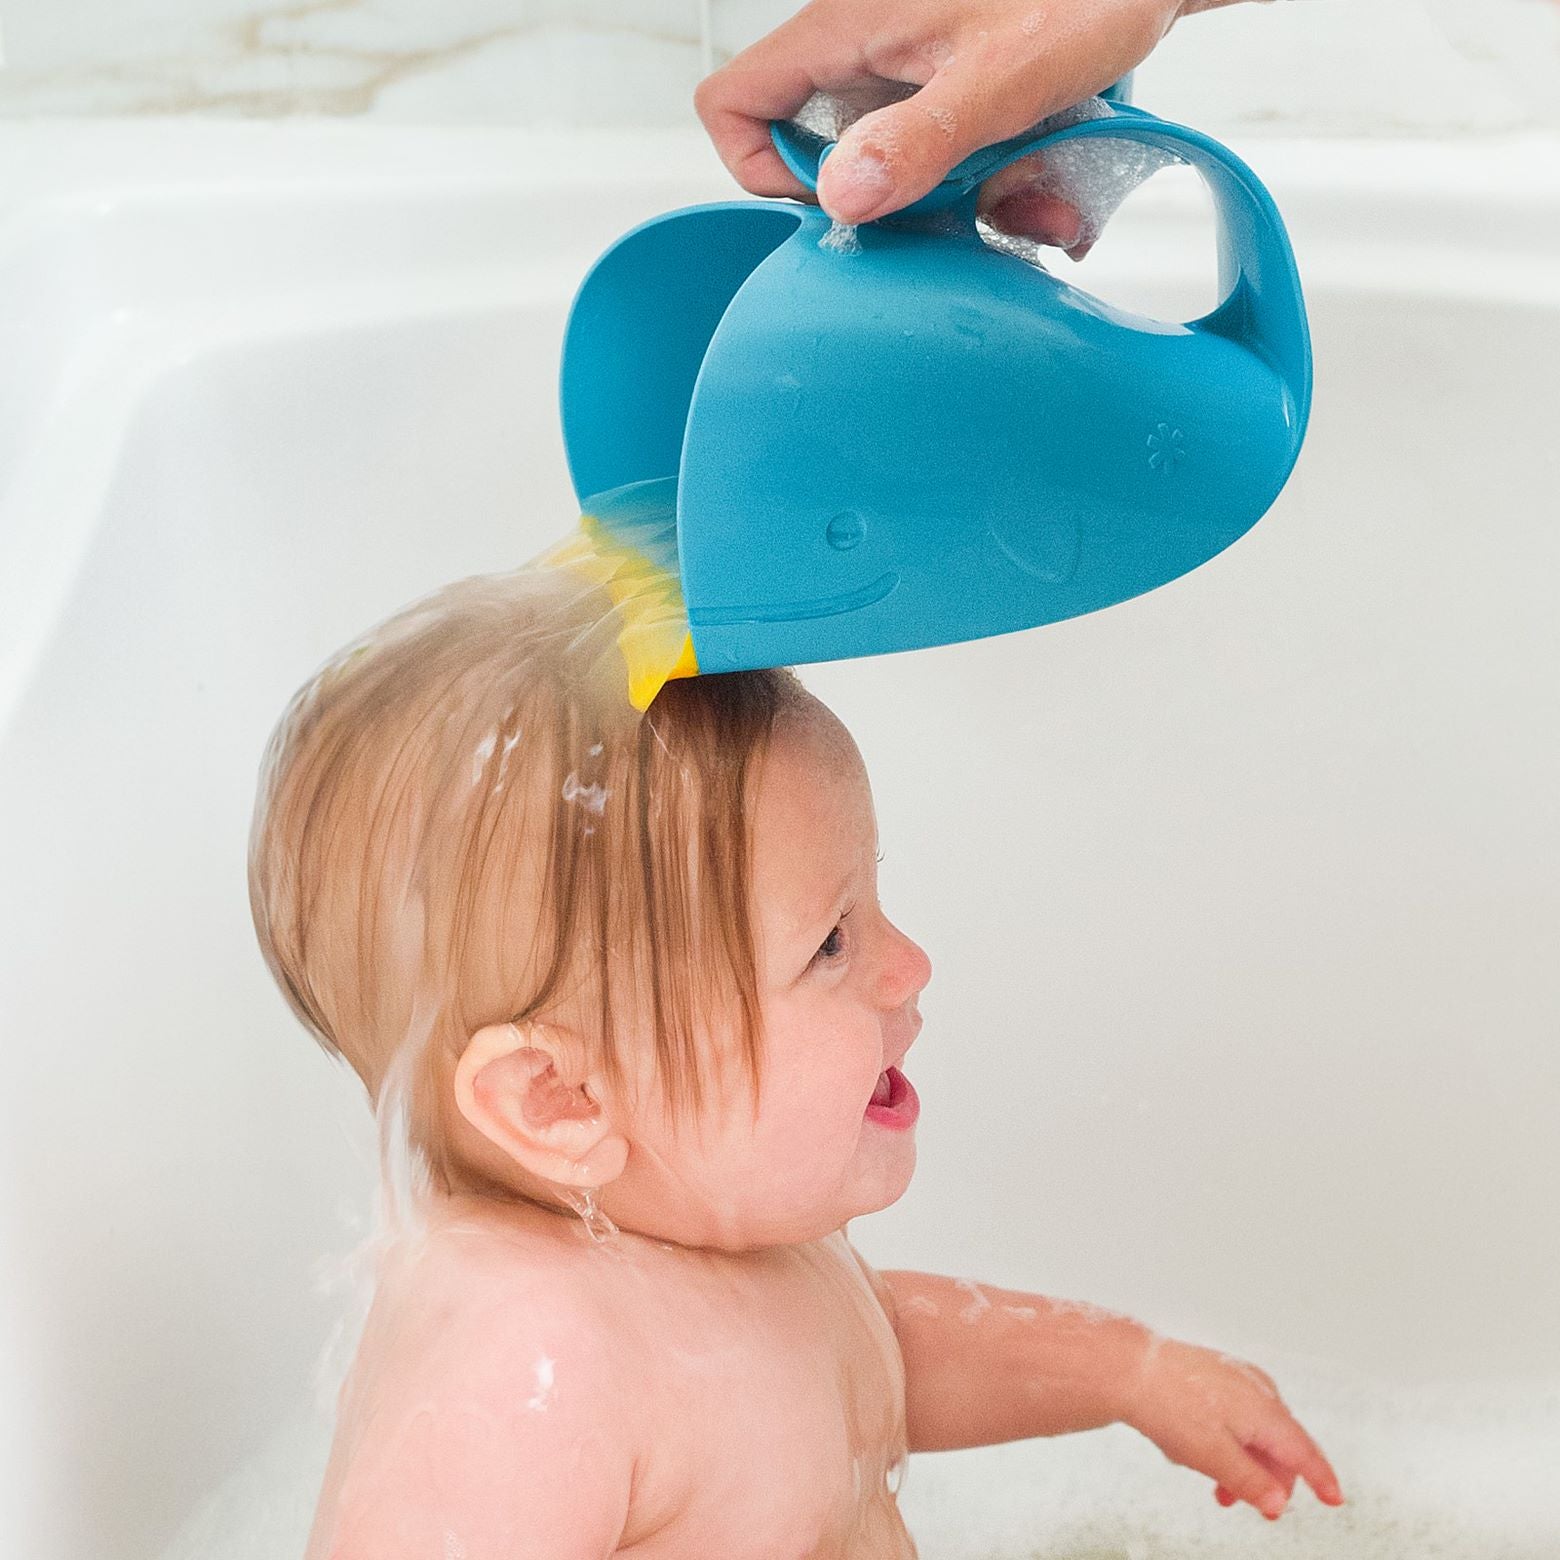 SkipHop Moby Waterfall Bath Rinser - Blue